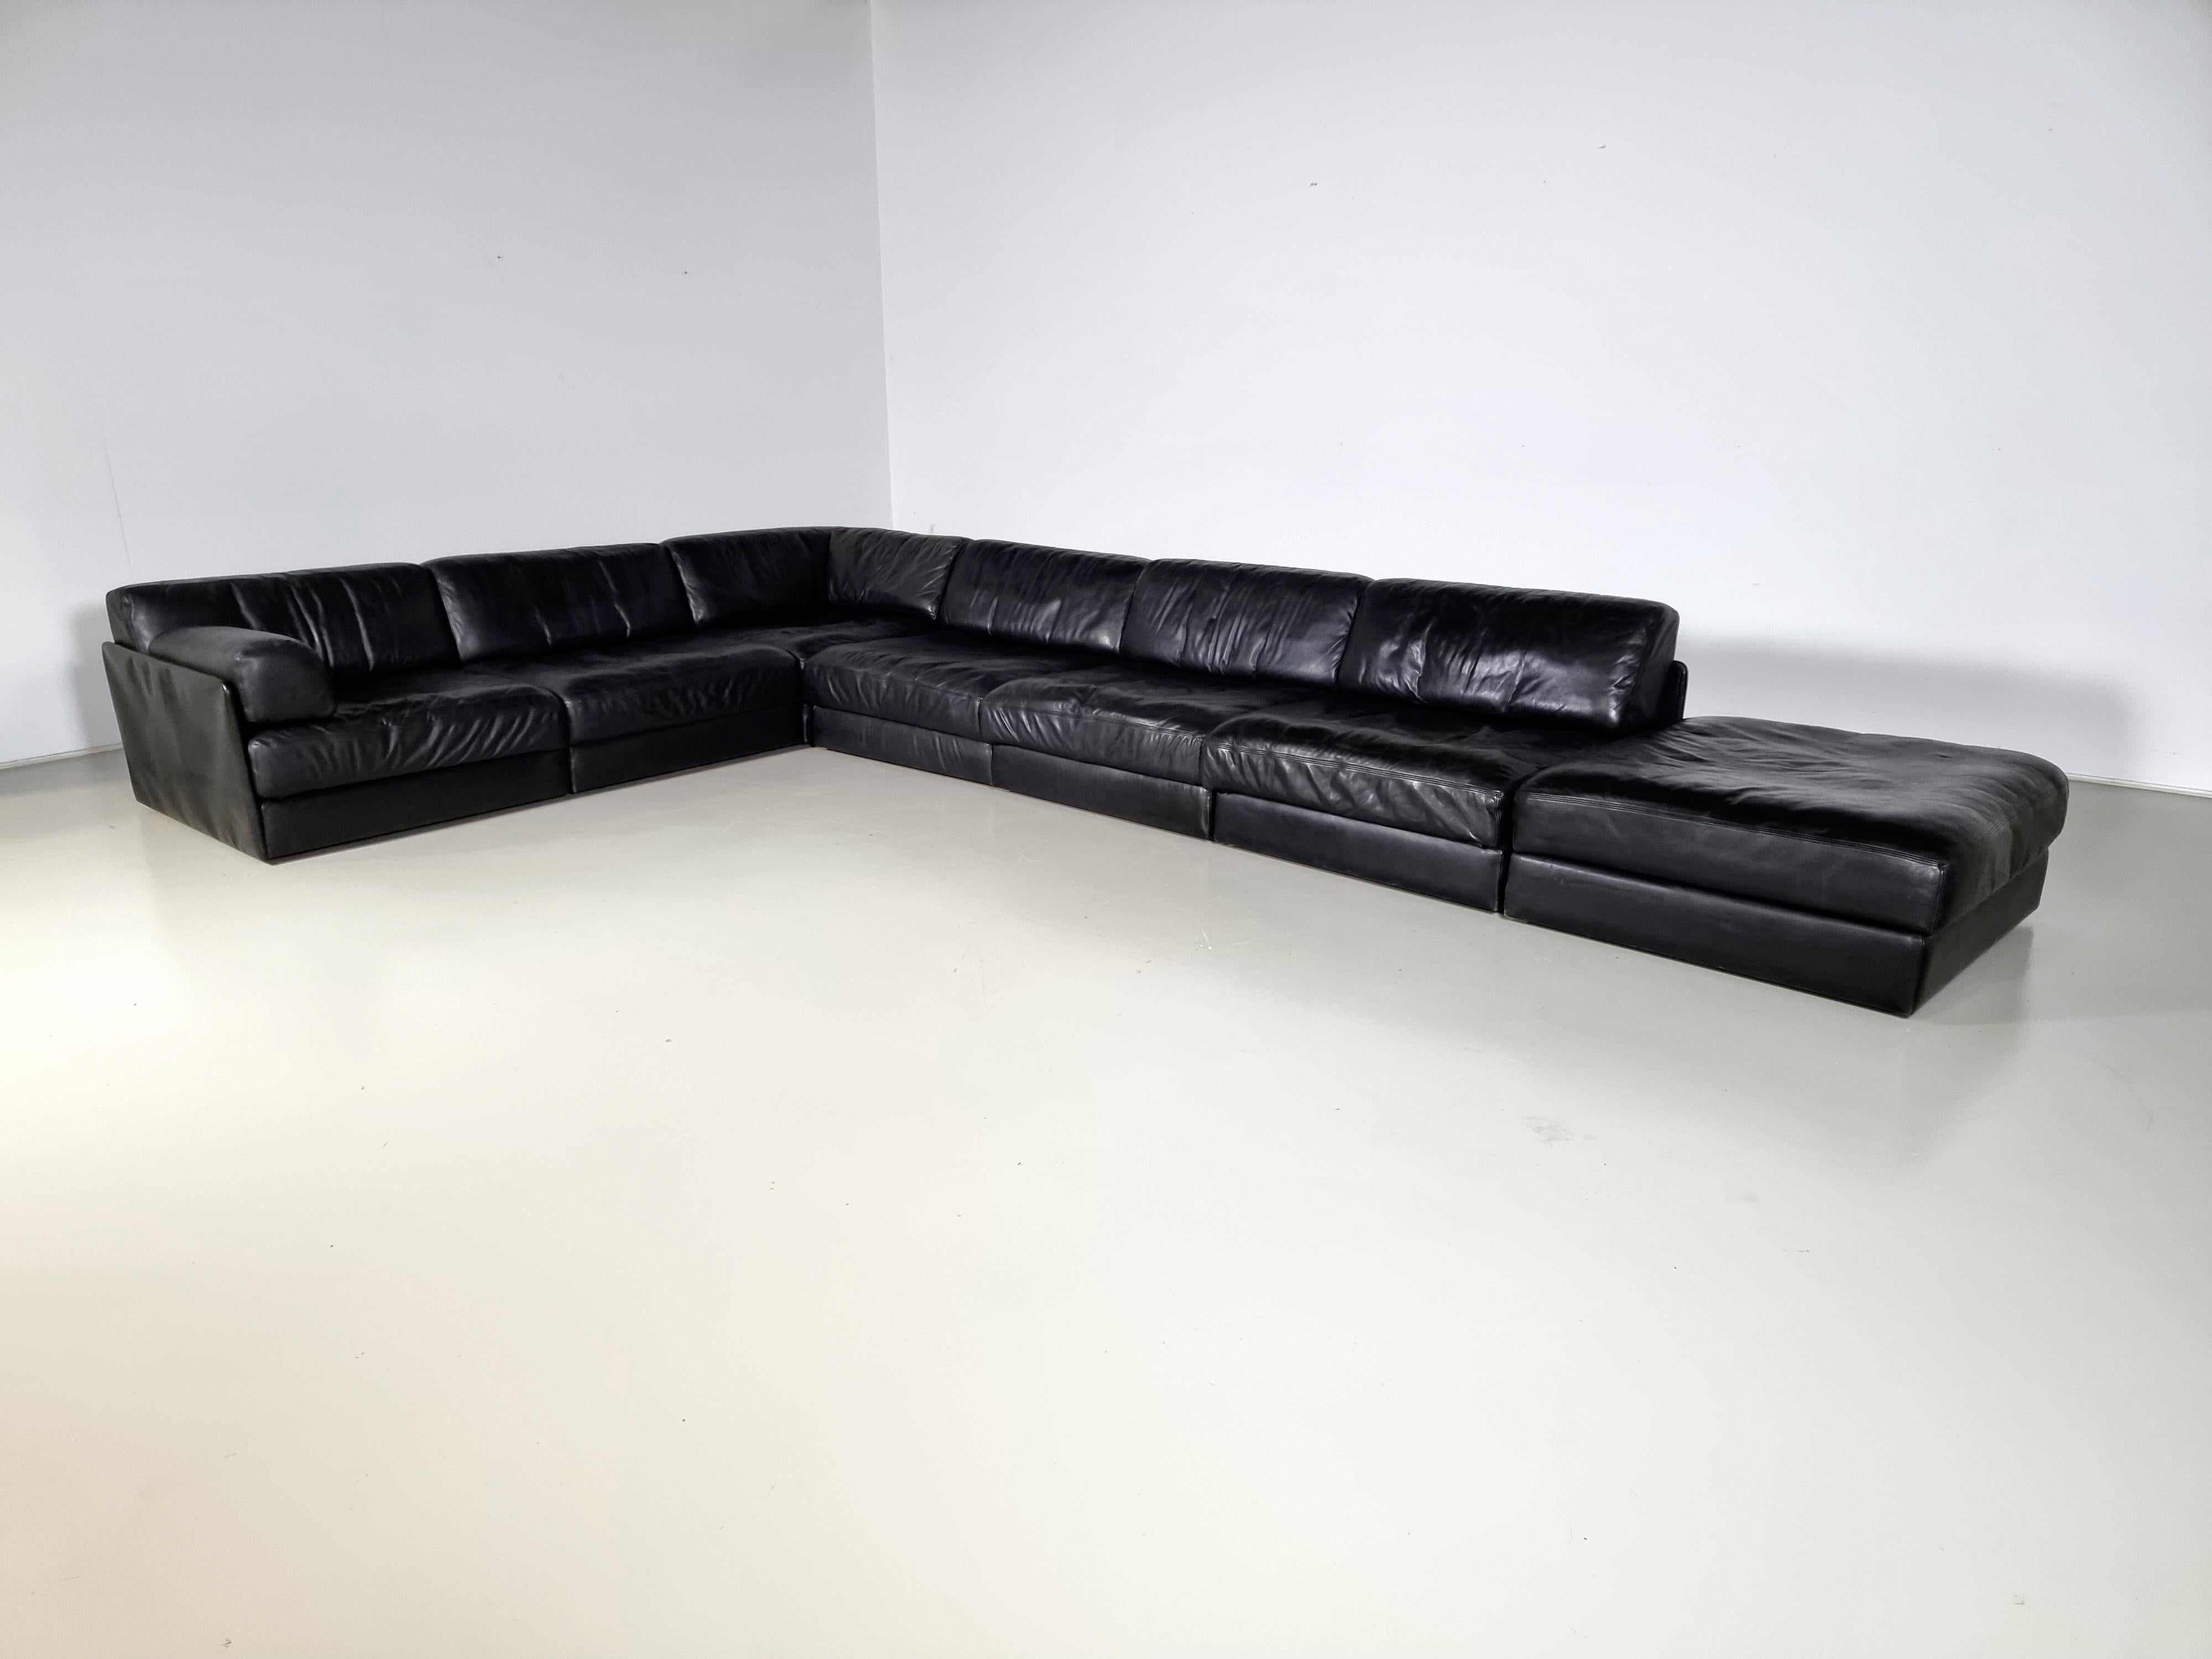 Beautiful 5-piece black leather modular sofa by De Sede from the 1970s. The sofa can be converted into a guest bed in just a few simple steps. Extremely comfortable with a nice patina. Many different settings are possible.

1 section is 90x90